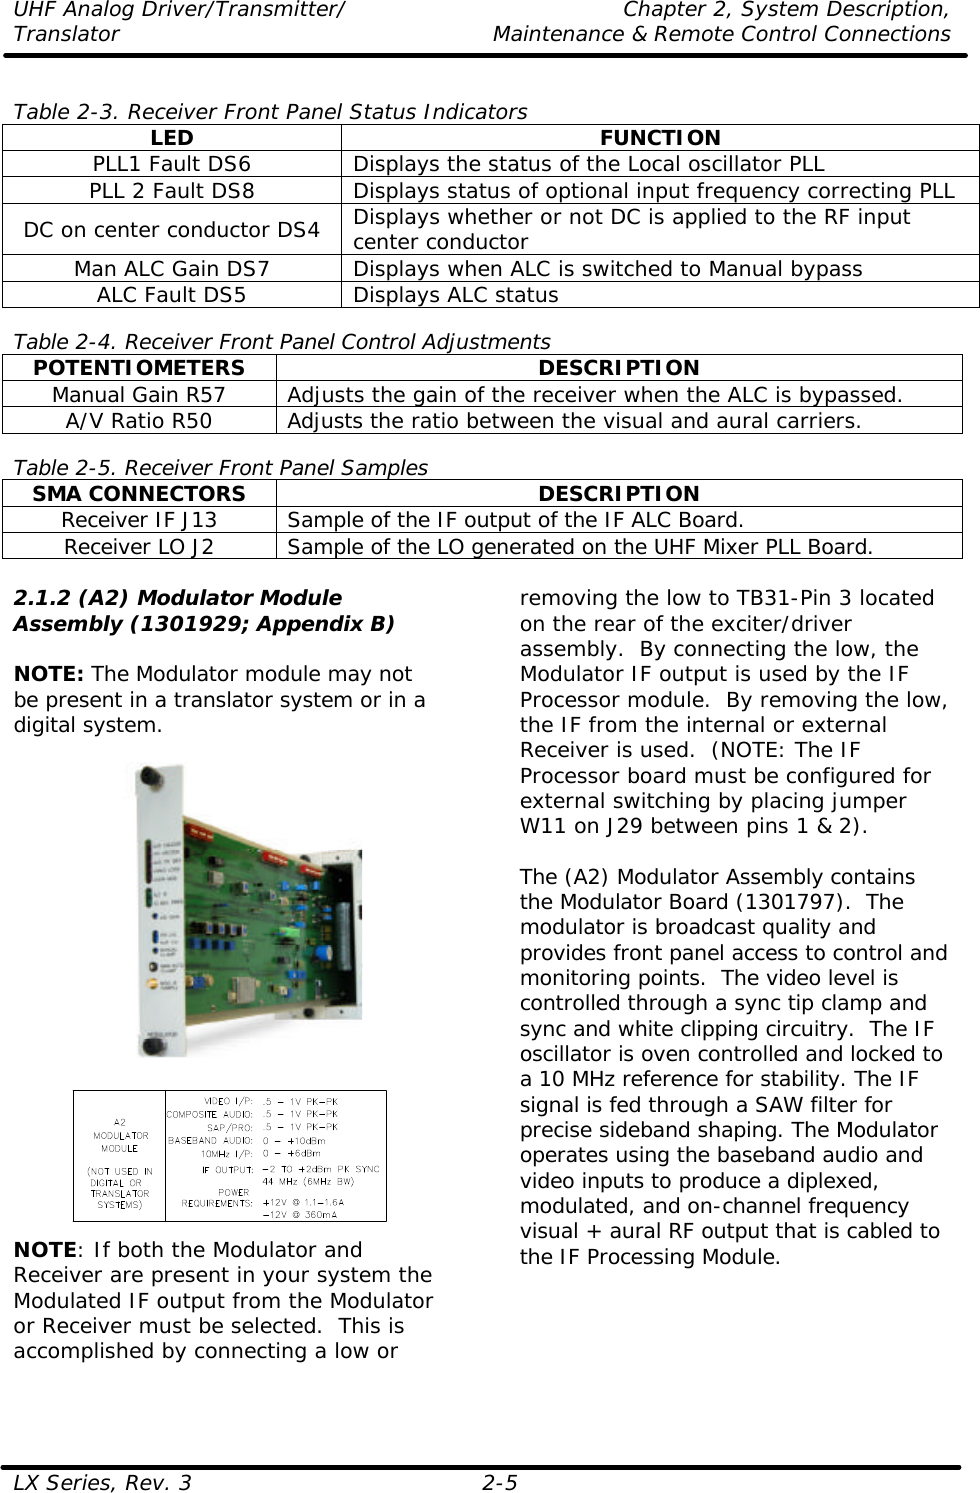 UHF Analog Driver/Transmitter/ Chapter 2, System Description, Translator Maintenance &amp; Remote Control Connections LX Series, Rev. 3 2-5 Table 2-3. Receiver Front Panel Status Indicators LED FUNCTION PLL1 Fault DS6 Displays the status of the Local oscillator PLL PLL 2 Fault DS8 Displays status of optional input frequency correcting PLL DC on center conductor DS4 Displays whether or not DC is applied to the RF input center conductor Man ALC Gain DS7 Displays when ALC is switched to Manual bypass ALC Fault DS5 Displays ALC status  Table 2-4. Receiver Front Panel Control Adjustments POTENTIOMETERS DESCRIPTION Manual Gain R57 Adjusts the gain of the receiver when the ALC is bypassed. A/V Ratio R50 Adjusts the ratio between the visual and aural carriers.  Table 2-5. Receiver Front Panel Samples SMA CONNECTORS DESCRIPTION Receiver IF J13 Sample of the IF output of the IF ALC Board. Receiver LO J2 Sample of the LO generated on the UHF Mixer PLL Board.  2.1.2 (A2) Modulator Module Assembly (1301929; Appendix B)  NOTE: The Modulator module may not be present in a translator system or in a digital system.     NOTE: If both the Modulator and Receiver are present in your system the Modulated IF output from the Modulator or Receiver must be selected.  This is accomplished by connecting a low or removing the low to TB31-Pin 3 located on the rear of the exciter/driver assembly.  By connecting the low, the Modulator IF output is used by the IF Processor module.  By removing the low, the IF from the internal or external Receiver is used.  (NOTE: The IF Processor board must be configured for external switching by placing jumper W11 on J29 between pins 1 &amp; 2).  The (A2) Modulator Assembly contains the Modulator Board (1301797).  The modulator is broadcast quality and provides front panel access to control and monitoring points.  The video level is controlled through a sync tip clamp and sync and white clipping circuitry.  The IF oscillator is oven controlled and locked to a 10 MHz reference for stability. The IF signal is fed through a SAW filter for precise sideband shaping. The Modulator operates using the baseband audio and video inputs to produce a diplexed, modulated, and on-channel frequency visual + aural RF output that is cabled to the IF Processing Module.  